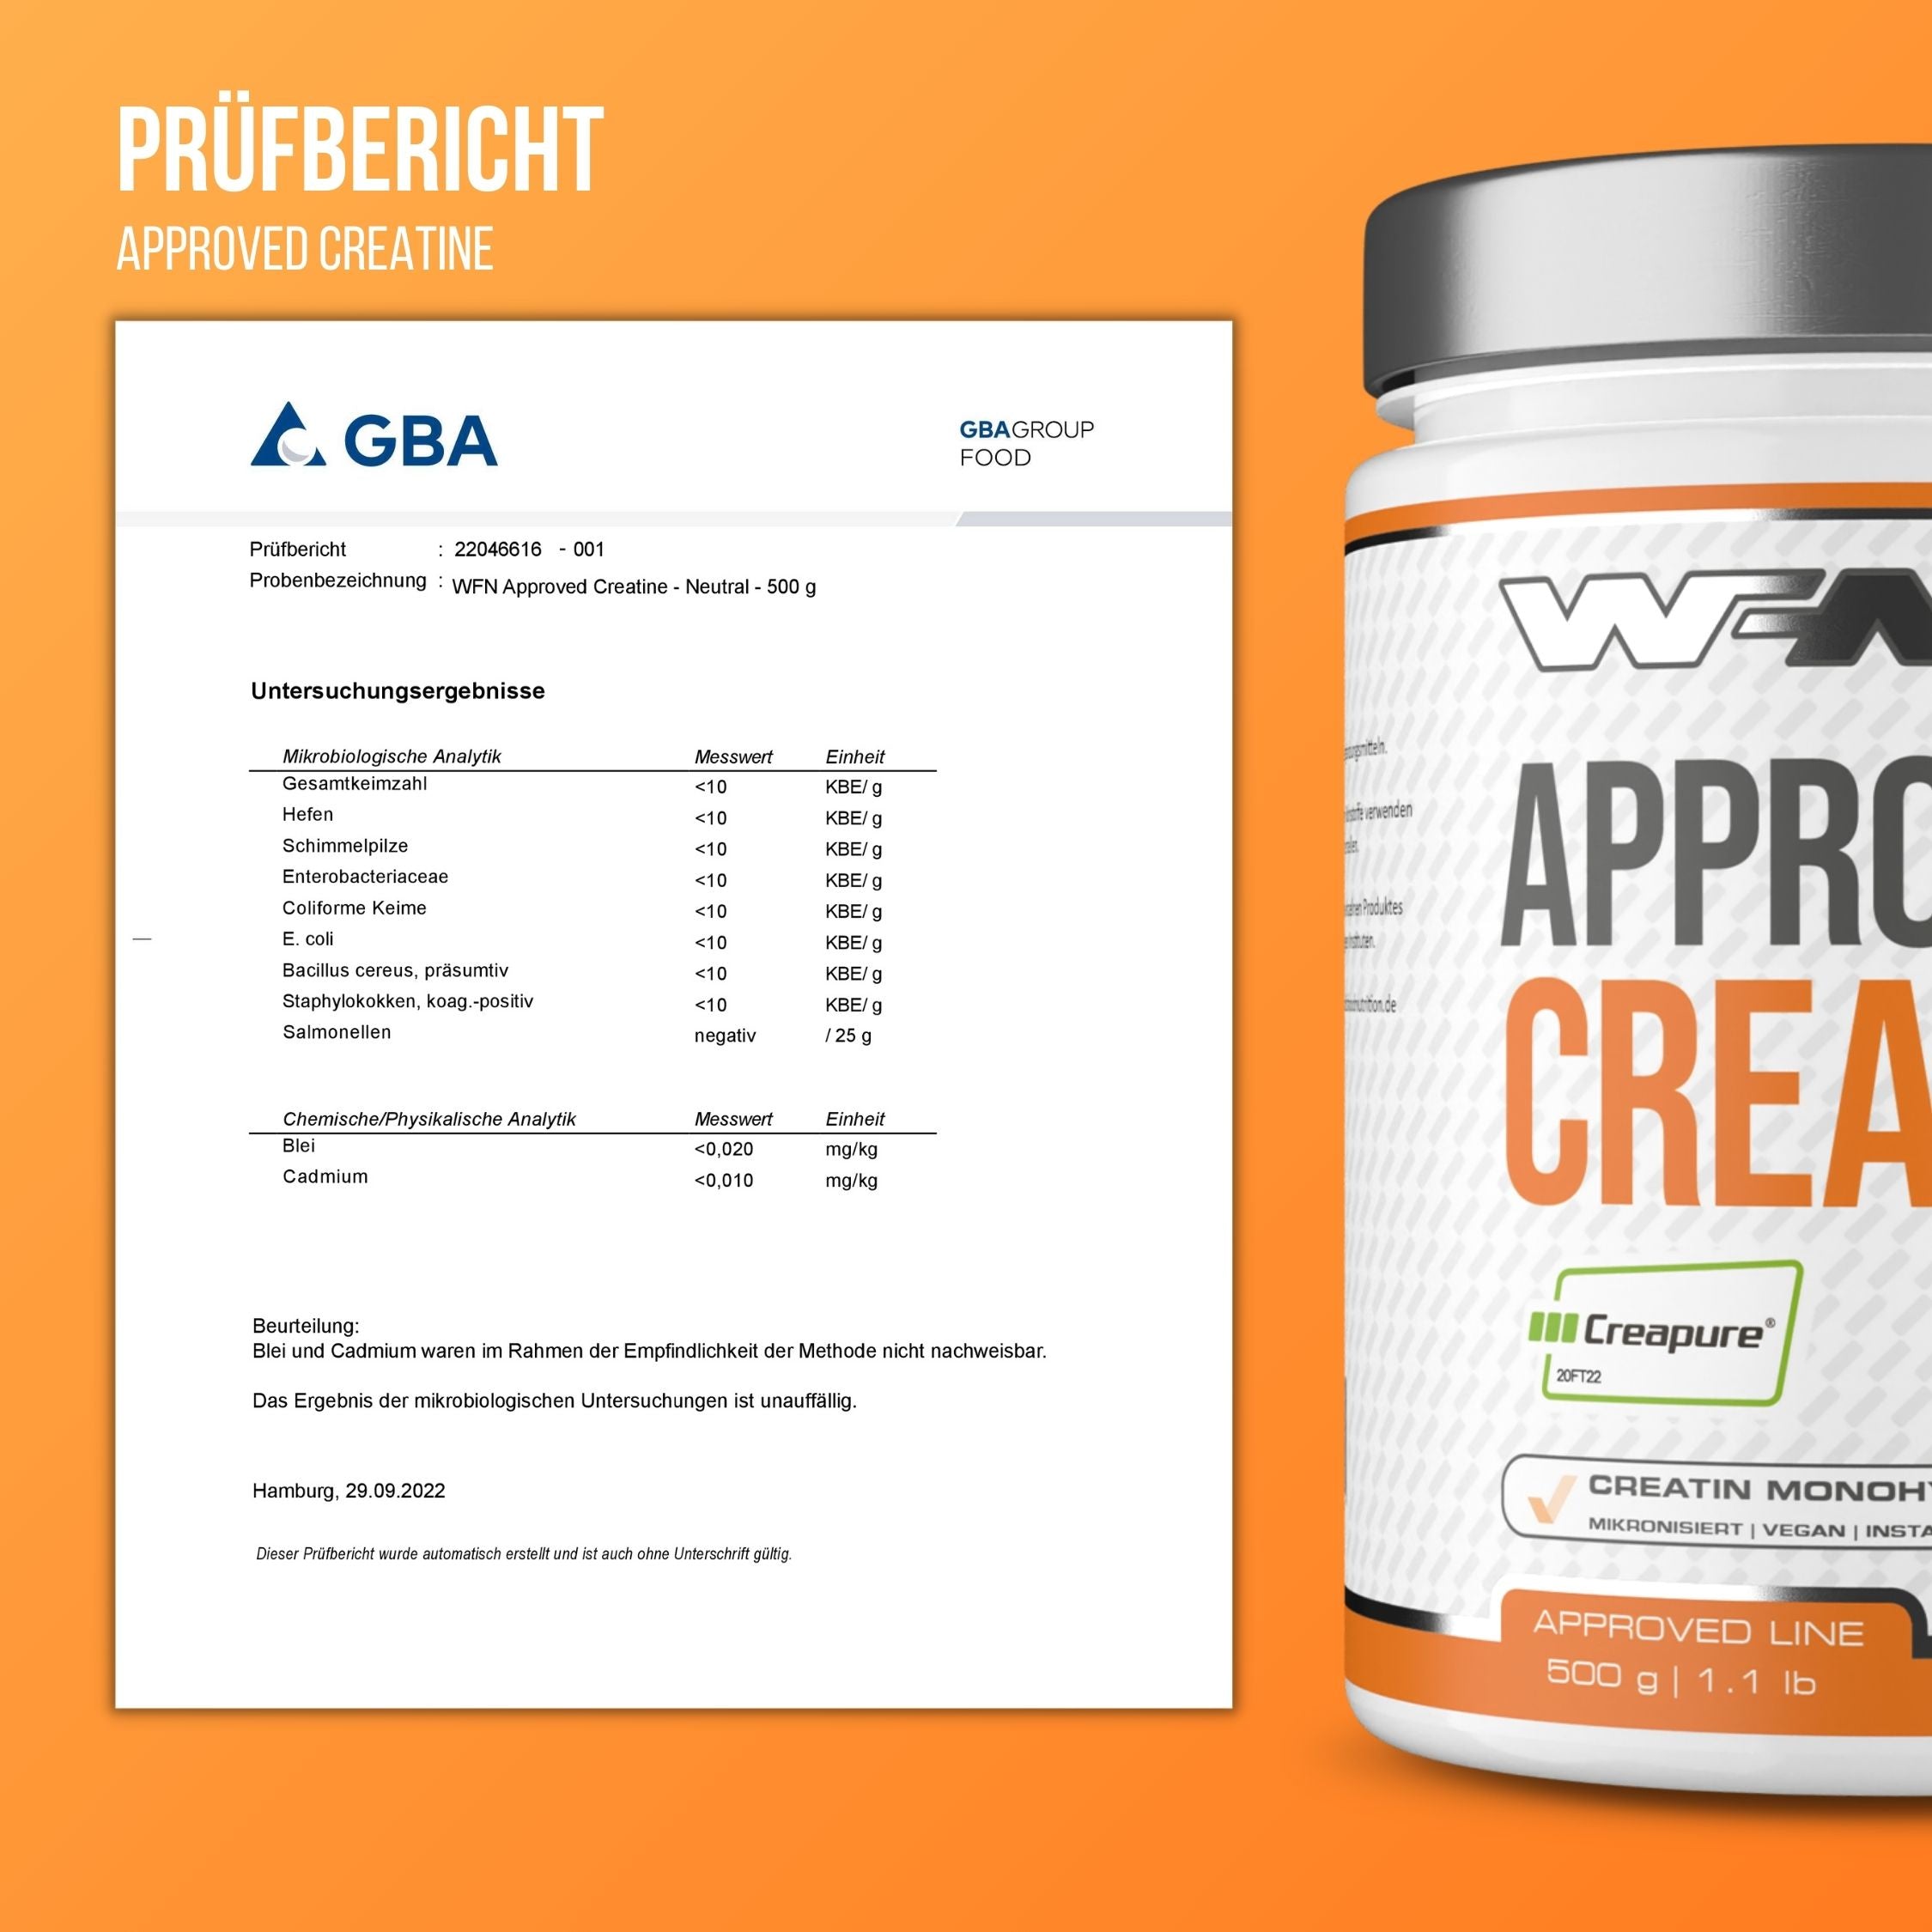 Approved Creatine